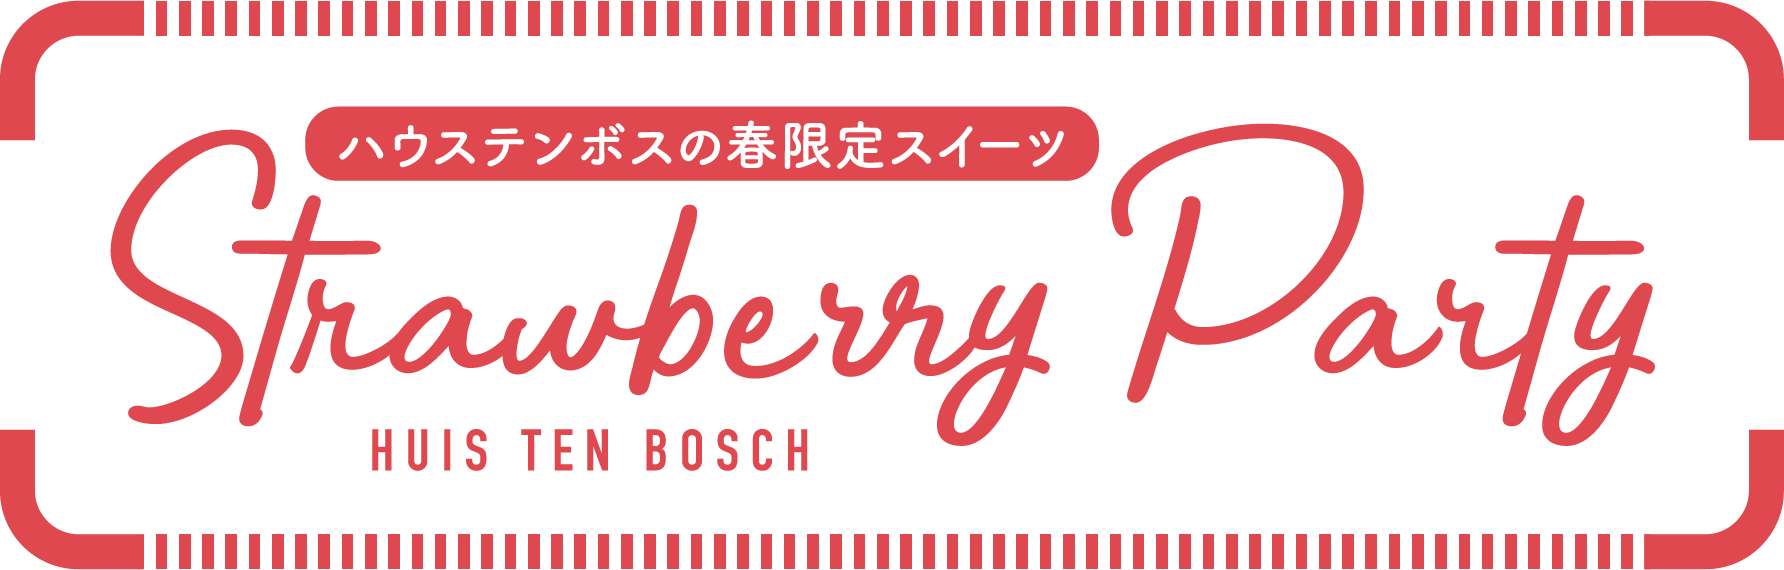 Hausten Boss Spring Limited Sweets Strawberry Party HUIS TEN BOSCH